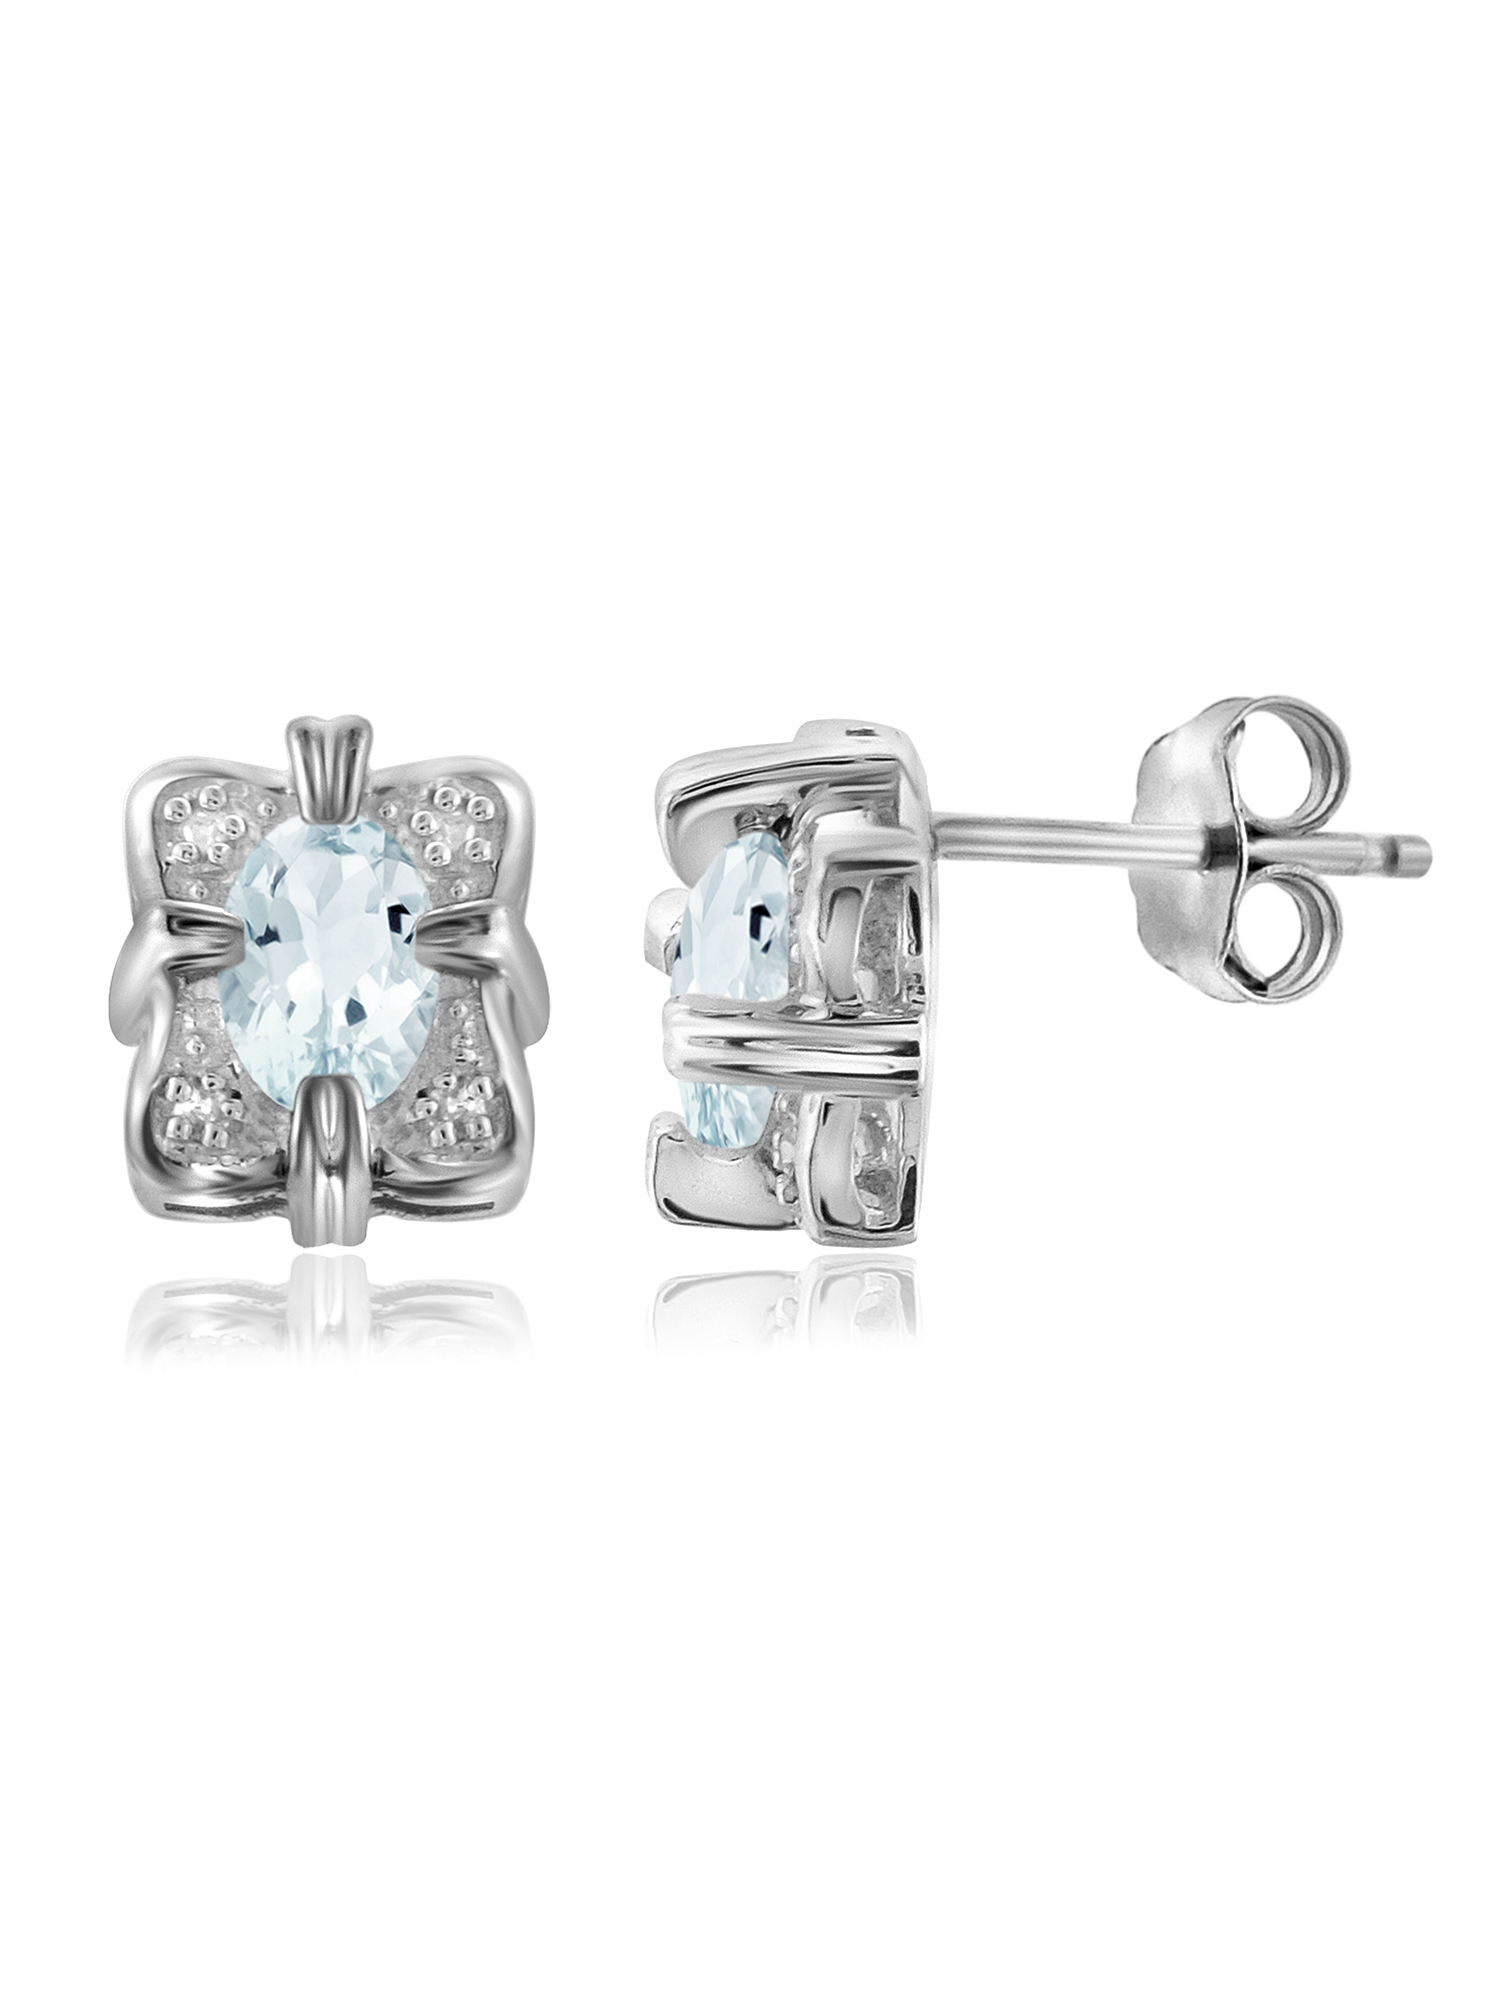 0.88 Carat Aquamarine Gemstone and Accent White Diamond Women's Sterling Silver Earrings - image 1 of 3